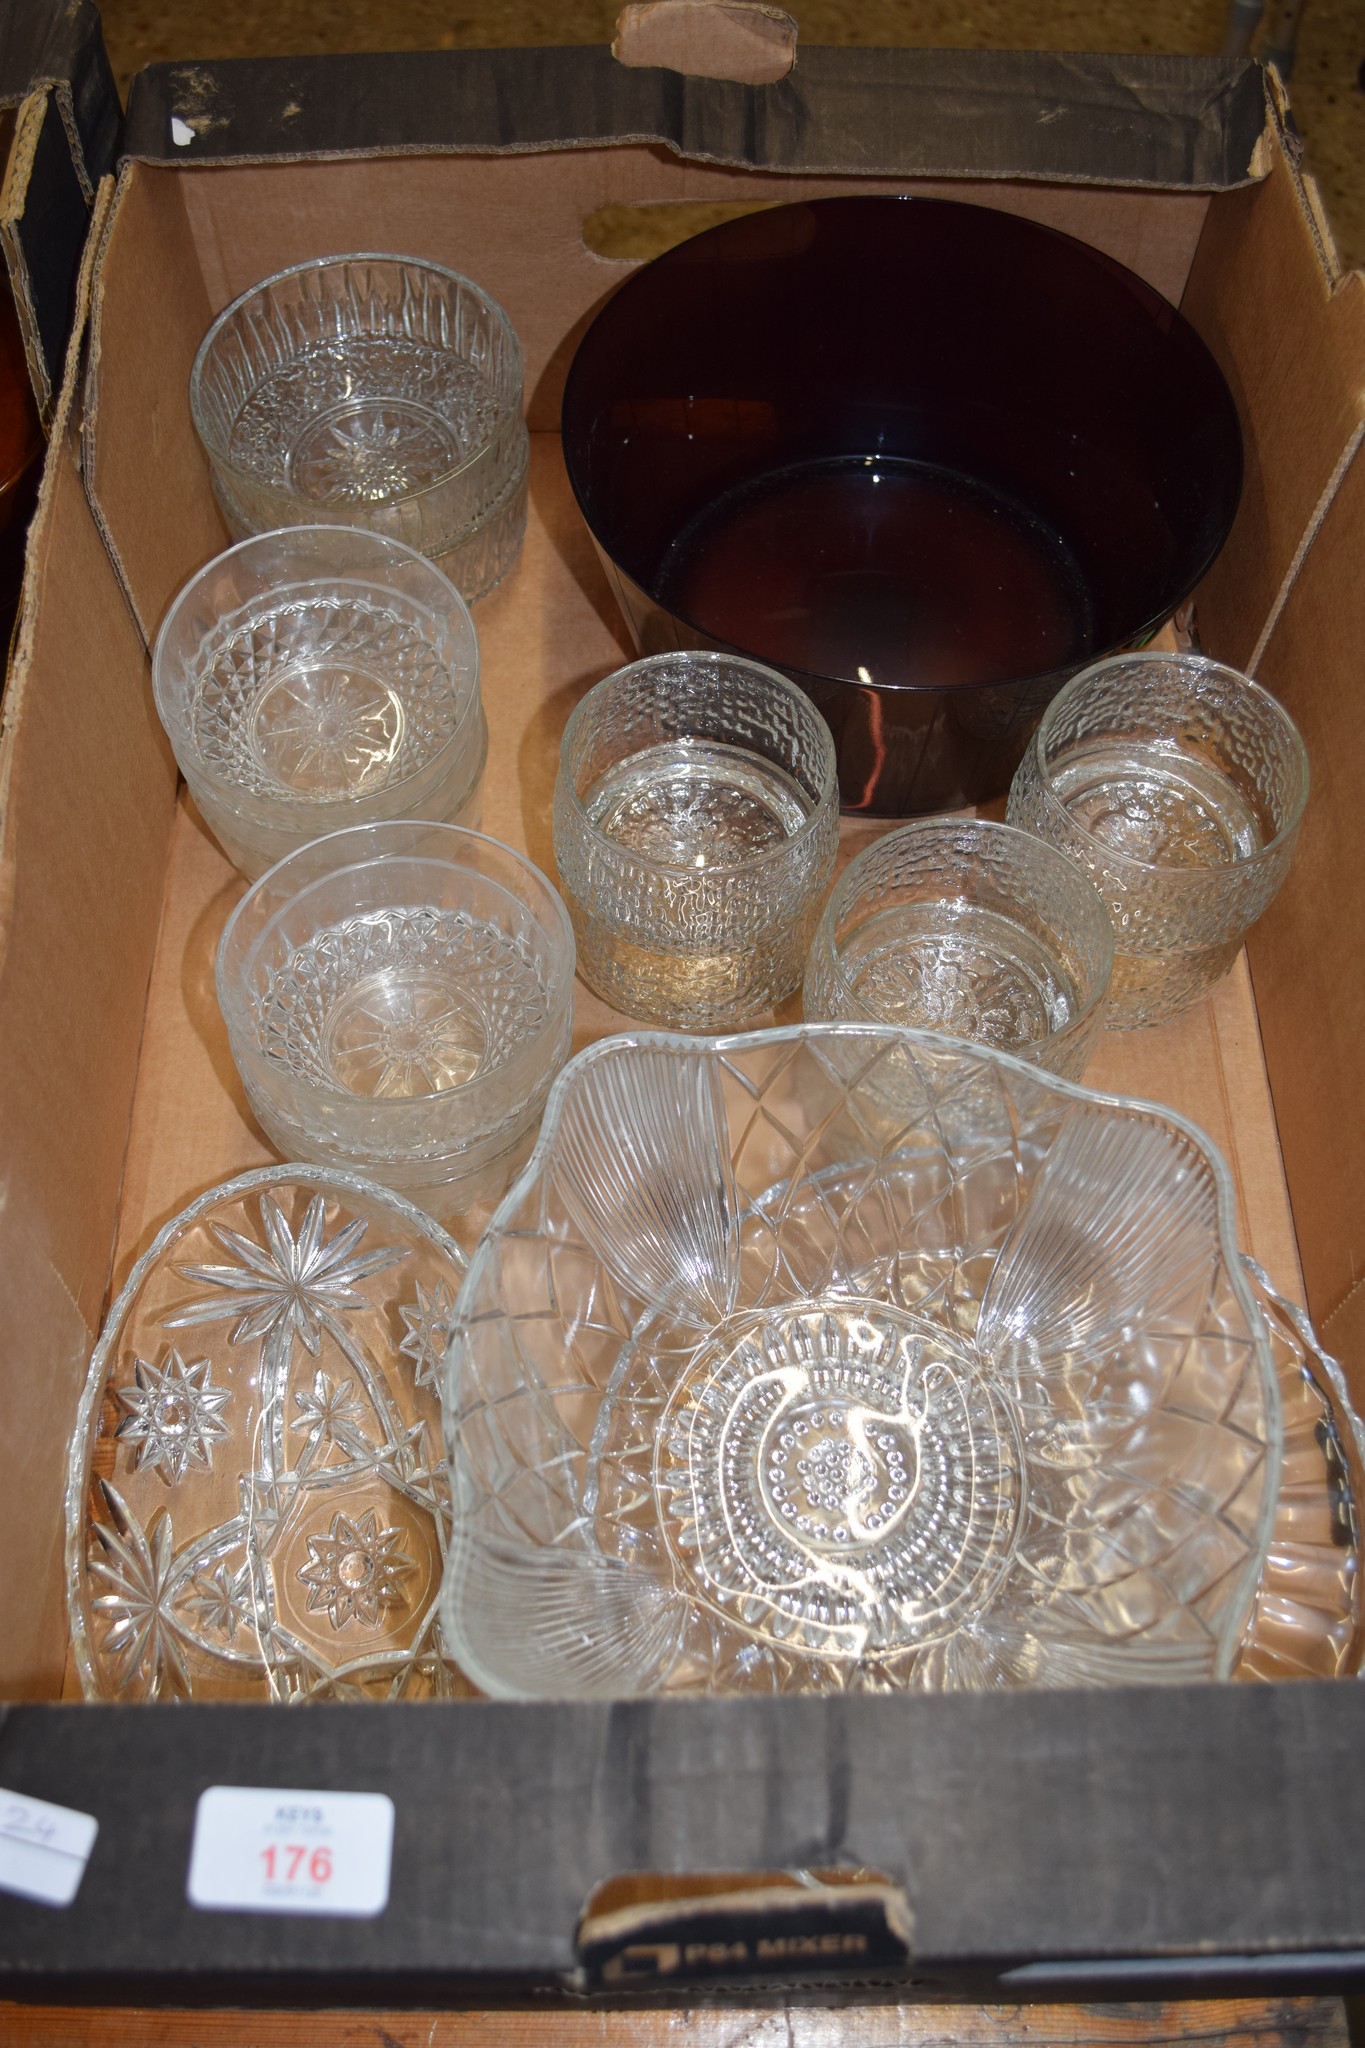 BOX CONTAINING CUT GLASS DISHES AND FRUIT BOWL